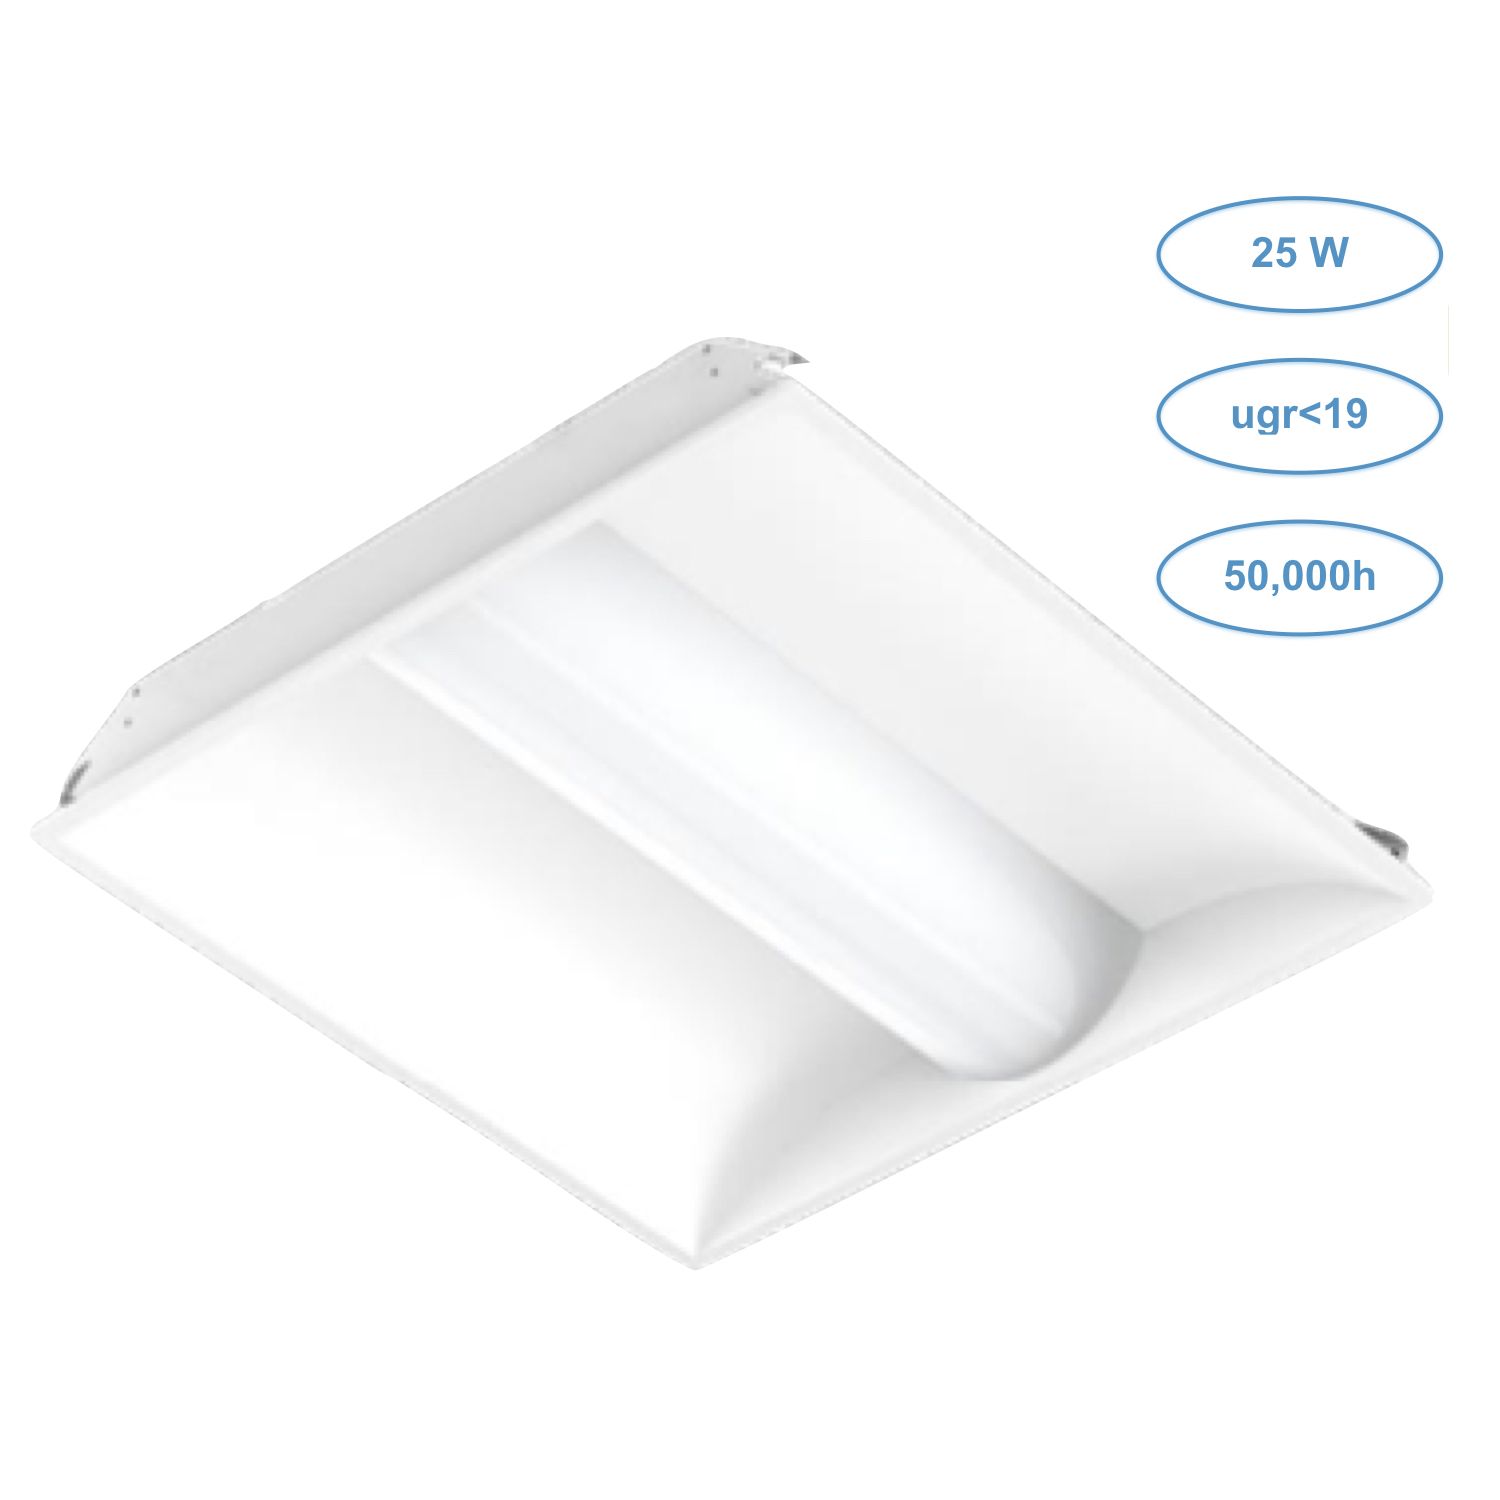 Dalle led eclairage indirect ugr <19 25w 2900lm 50,000h 595x595mm_0